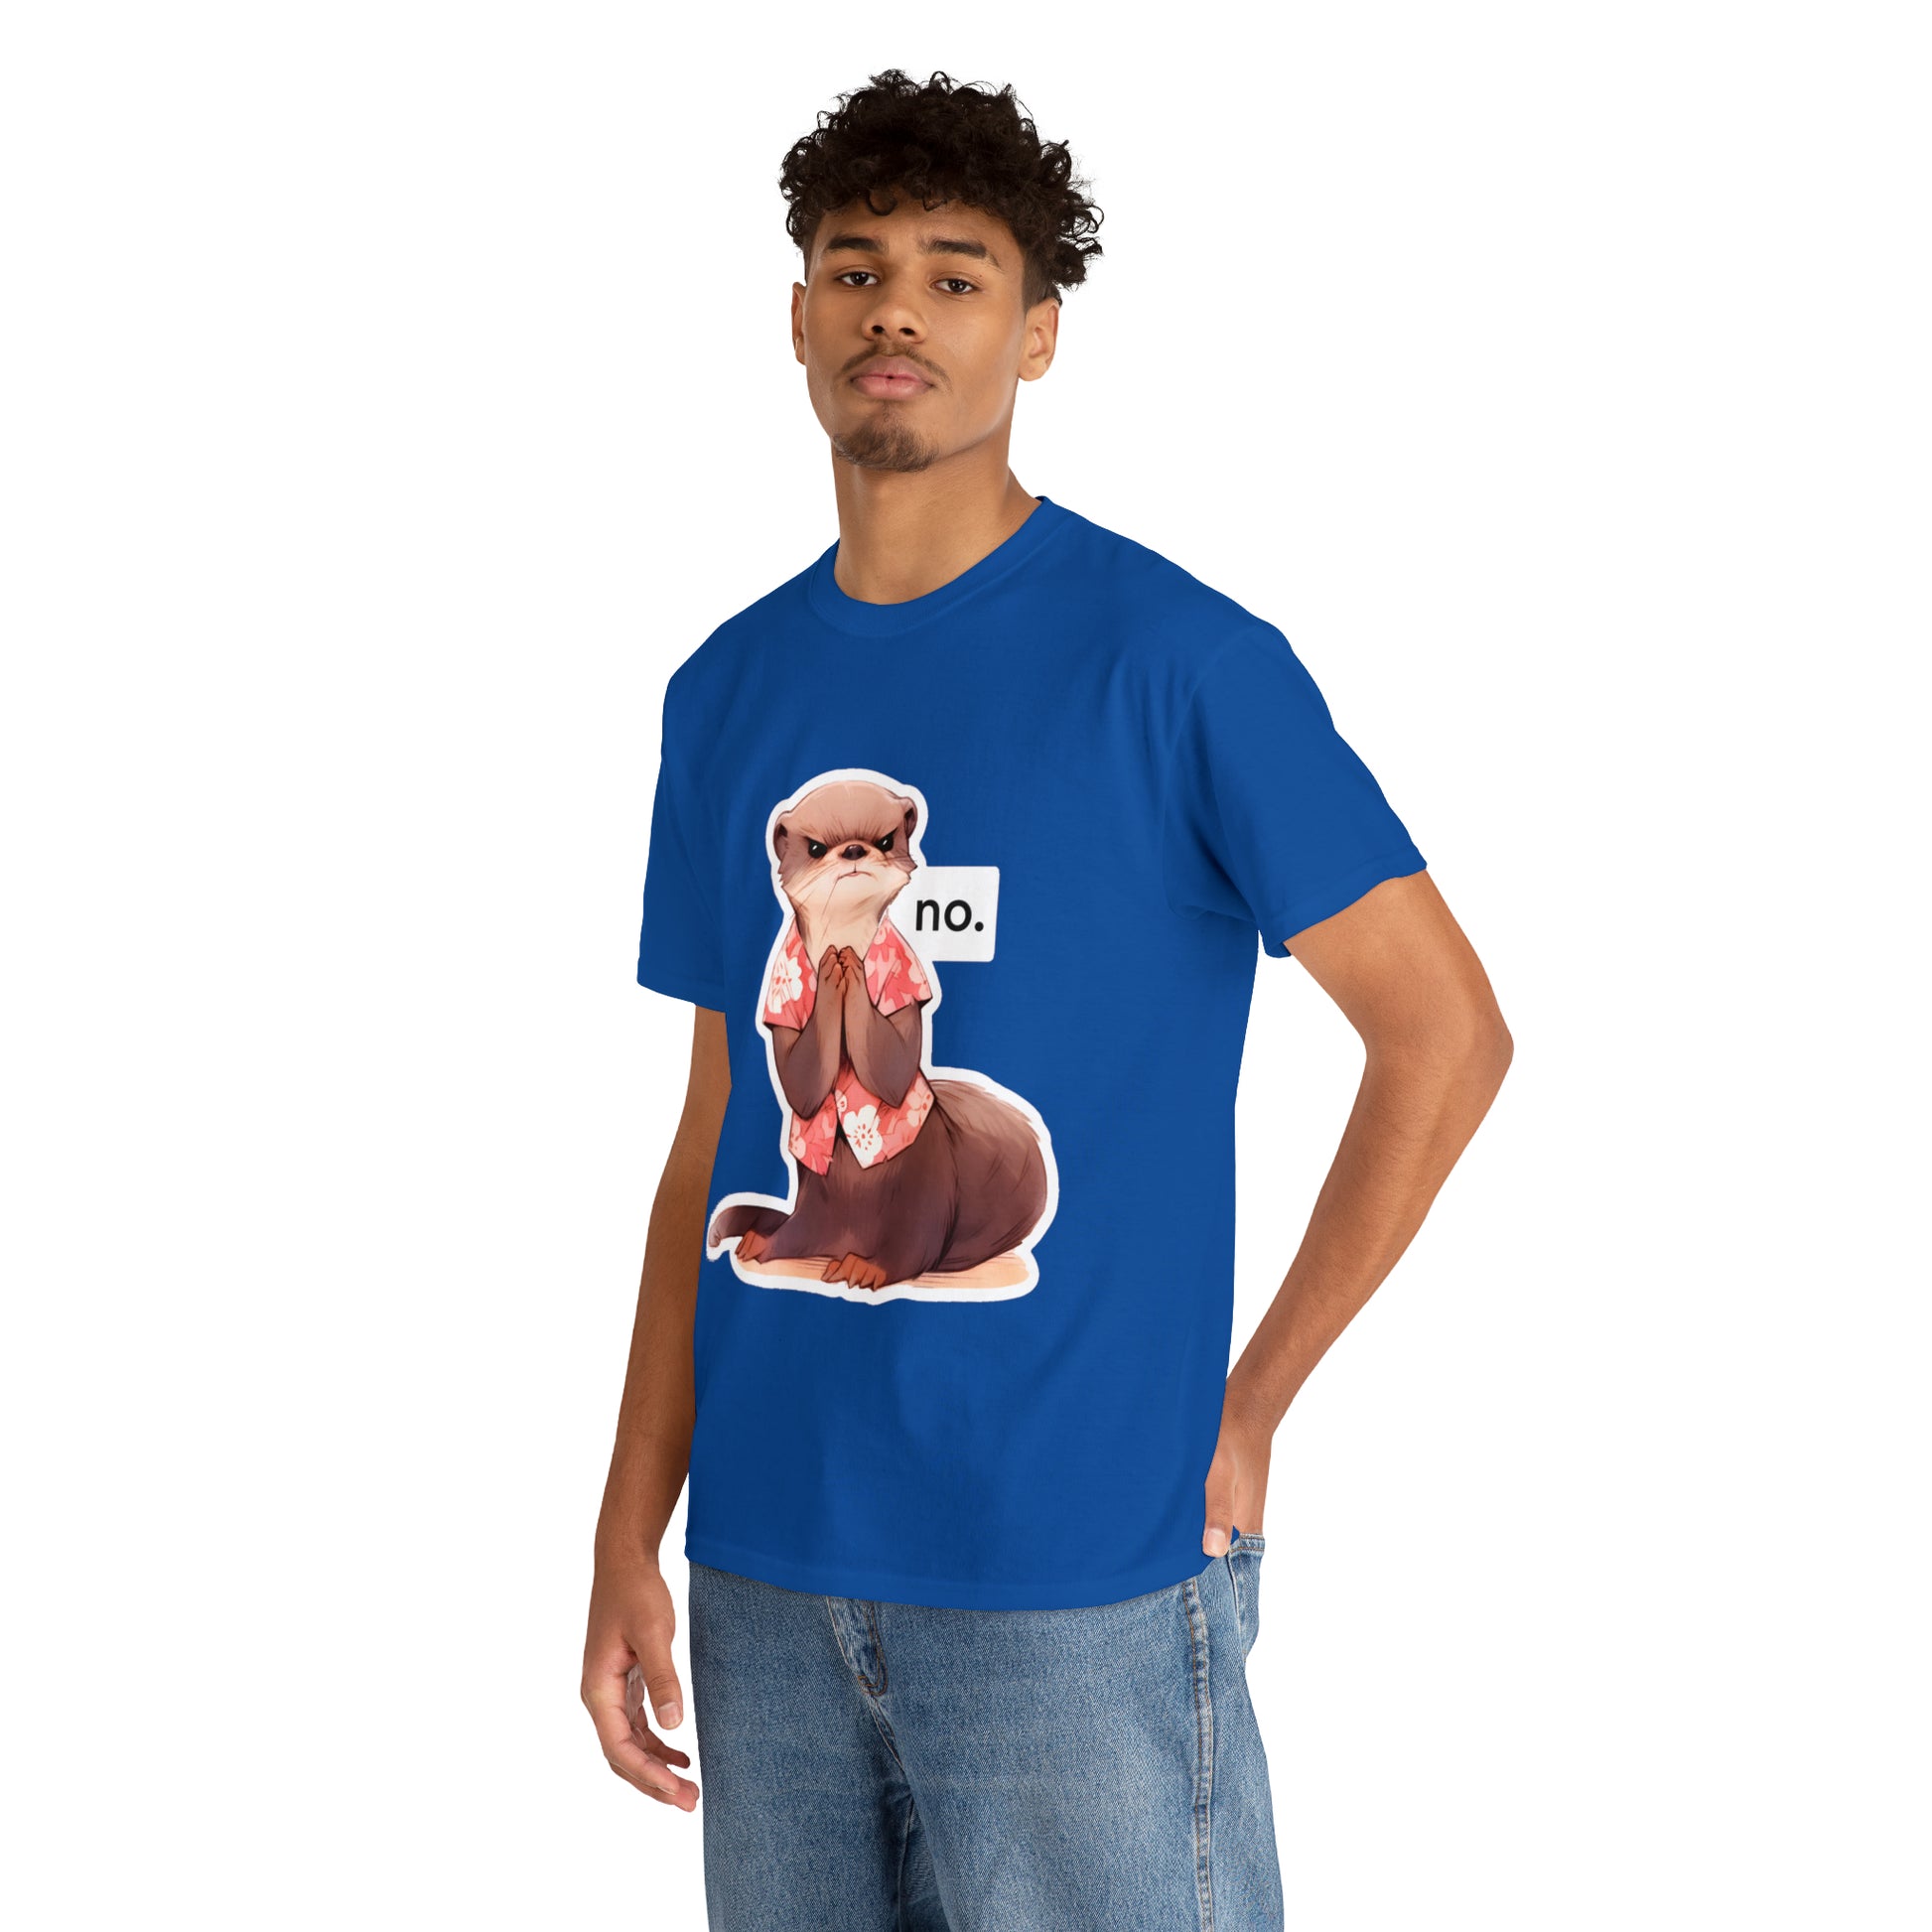 Angry Otter Says No Unisex Cotton Tee by Zeesdesign, Model Mockups with white background, Free shipping on orders over $50. Red, Blue, Black, Navy.